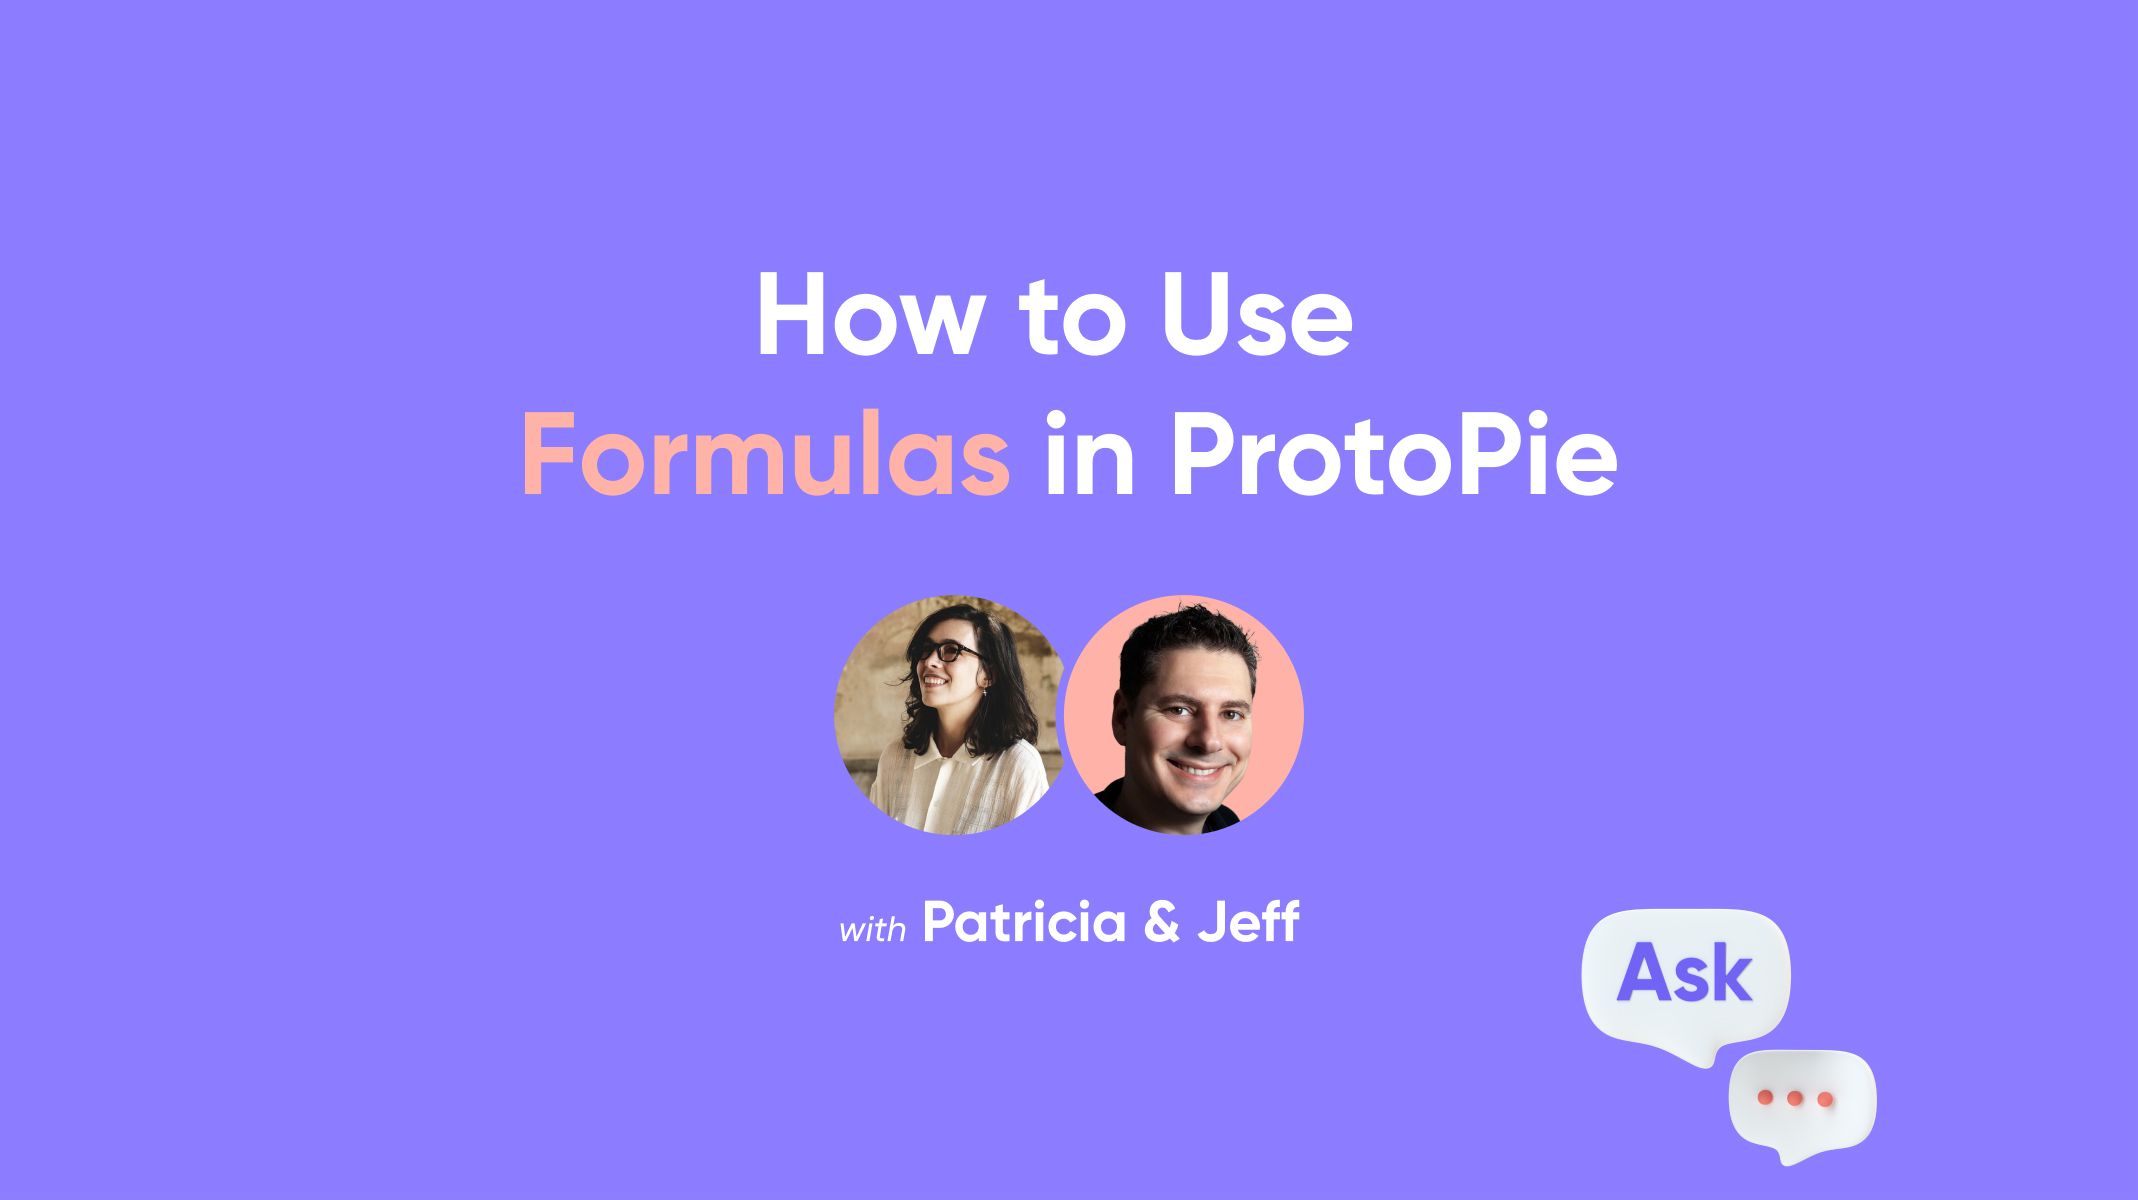 ask protopie session about using formulas in protopie